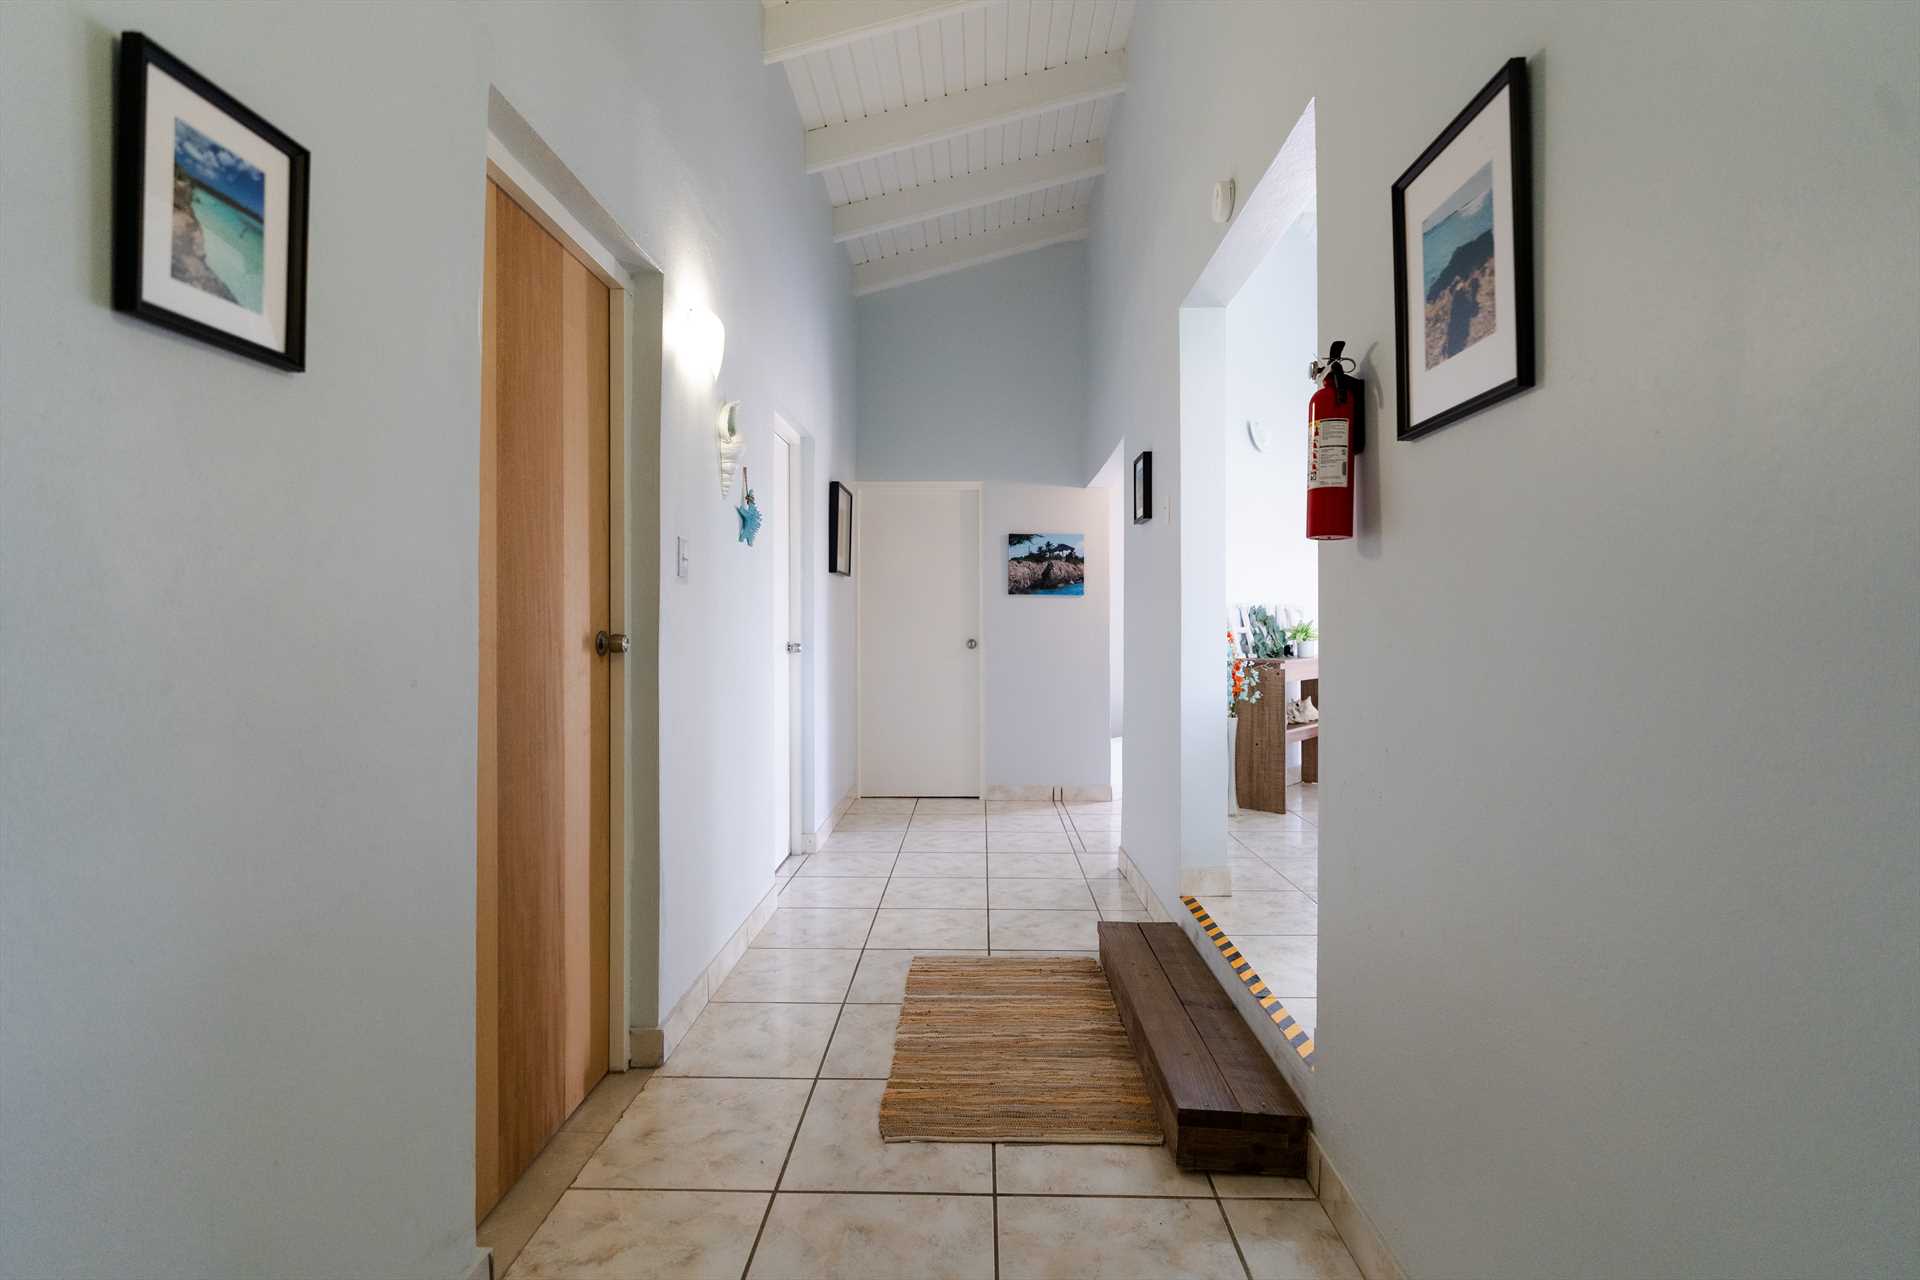 Corridor with access to all bedrooms an bathrooms